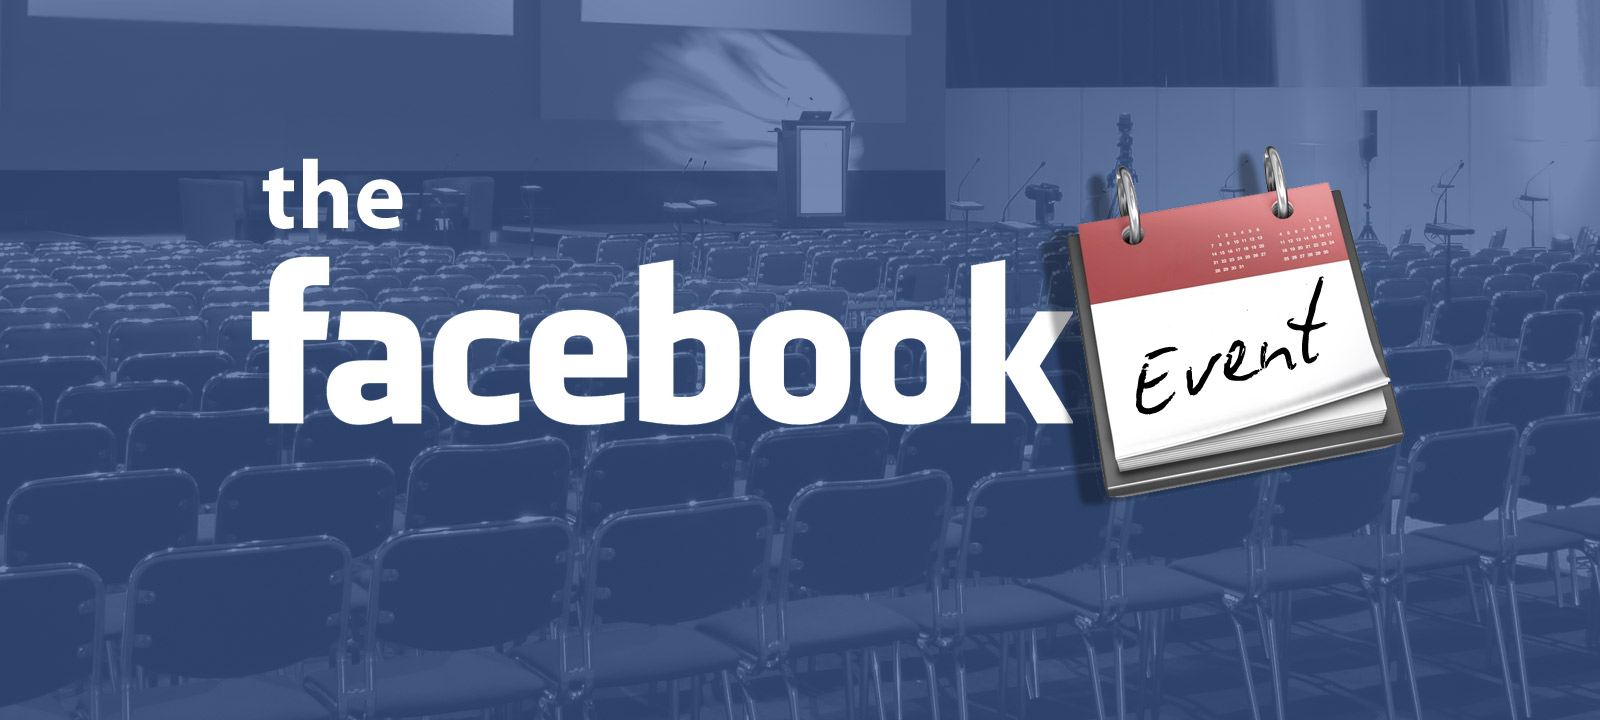 WWN Guide To Facebook Events Waterford Whispers News